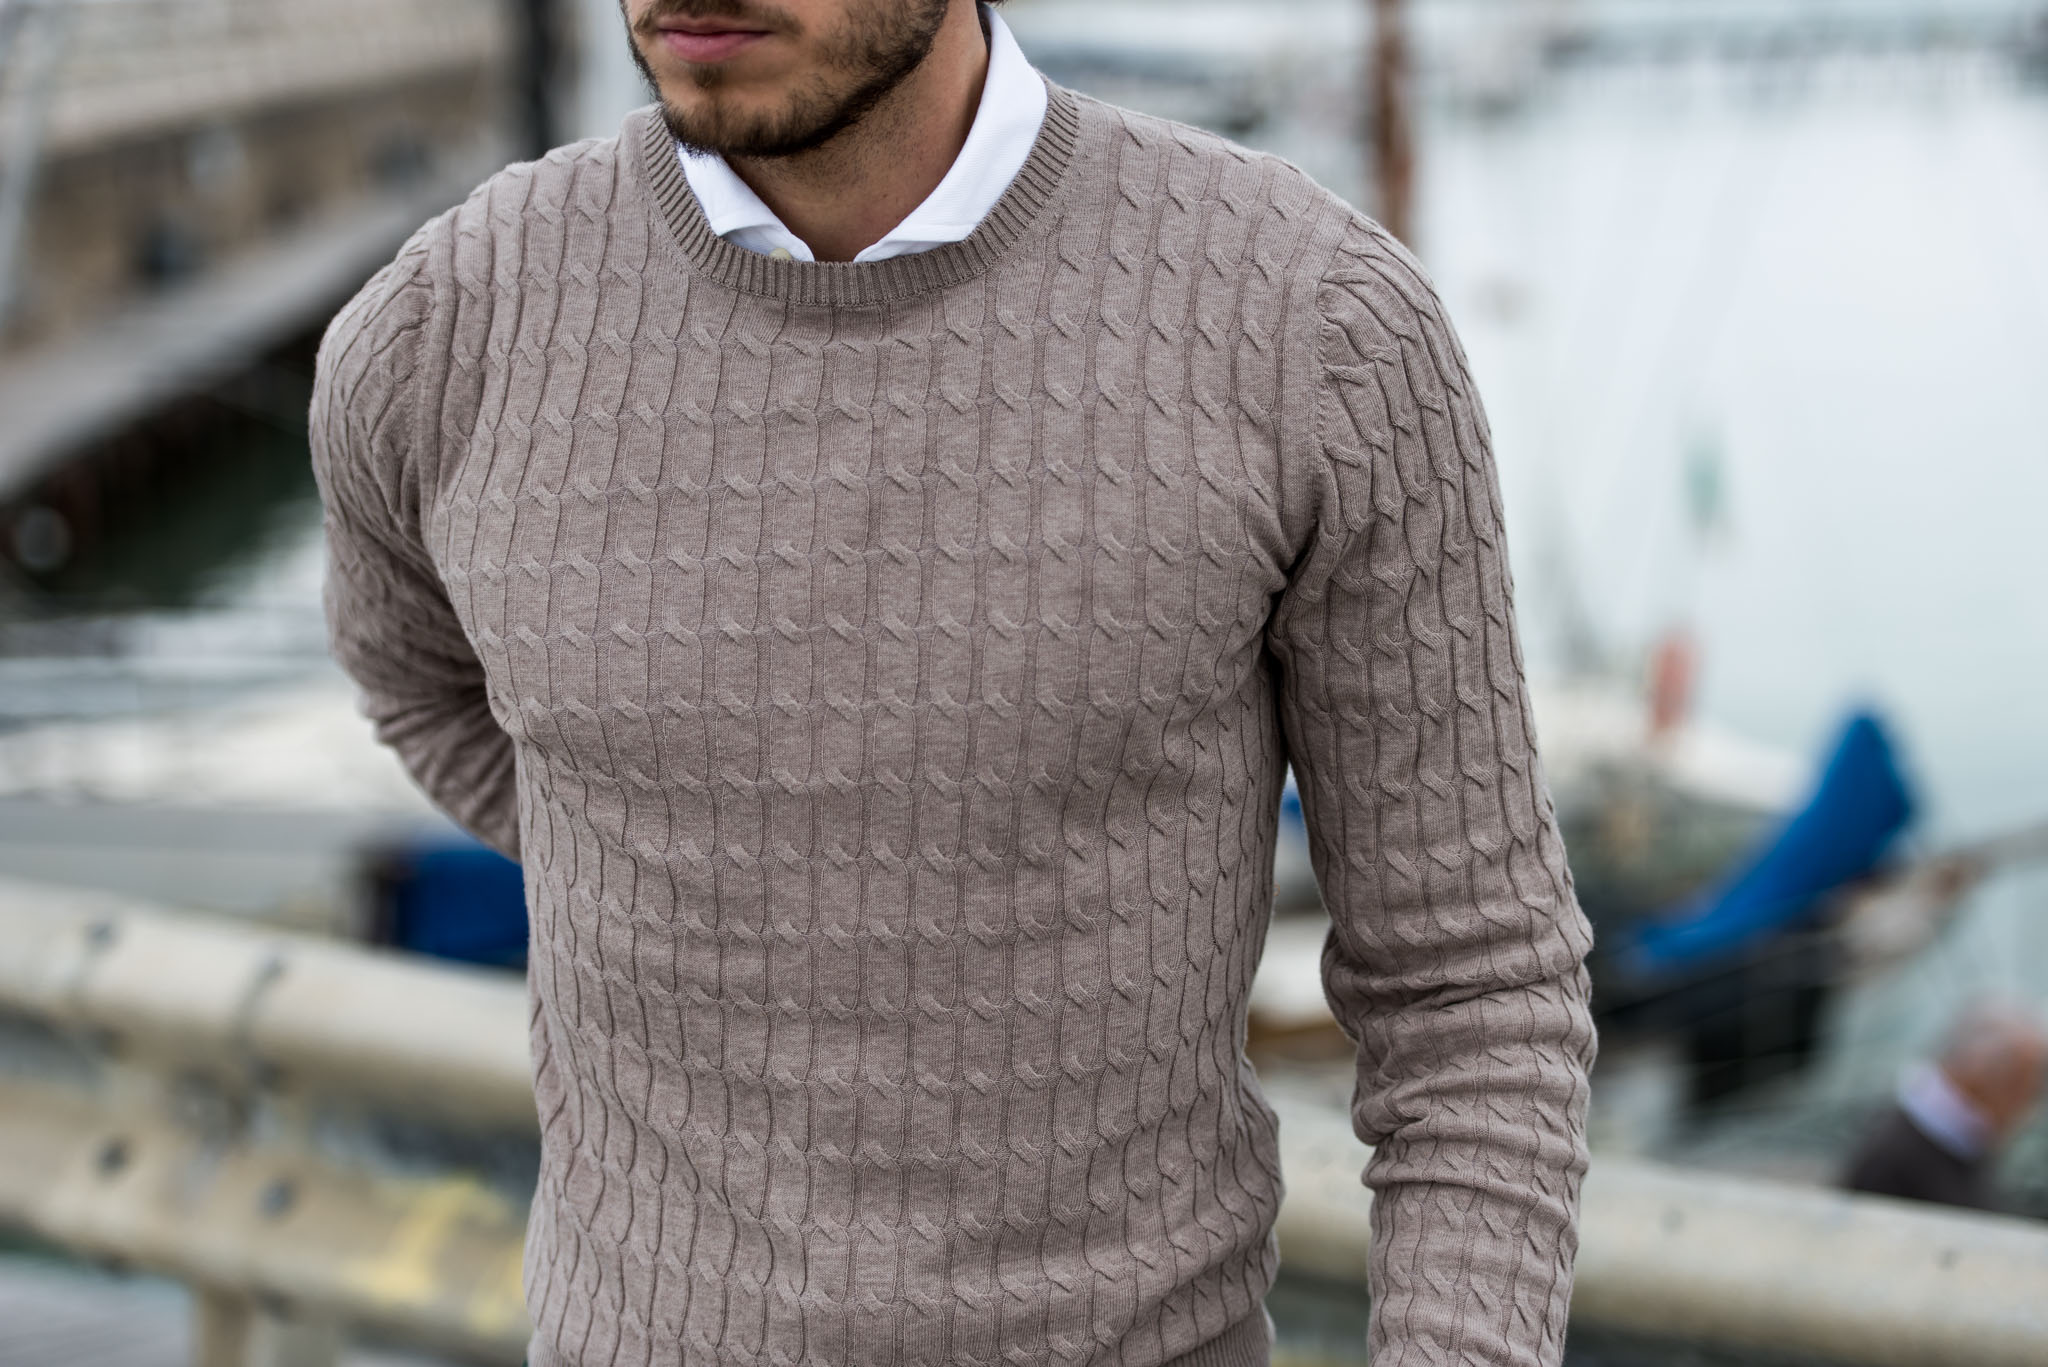 Maglificio Gran Sasso. Knit polo shirts: casual elegance for every day